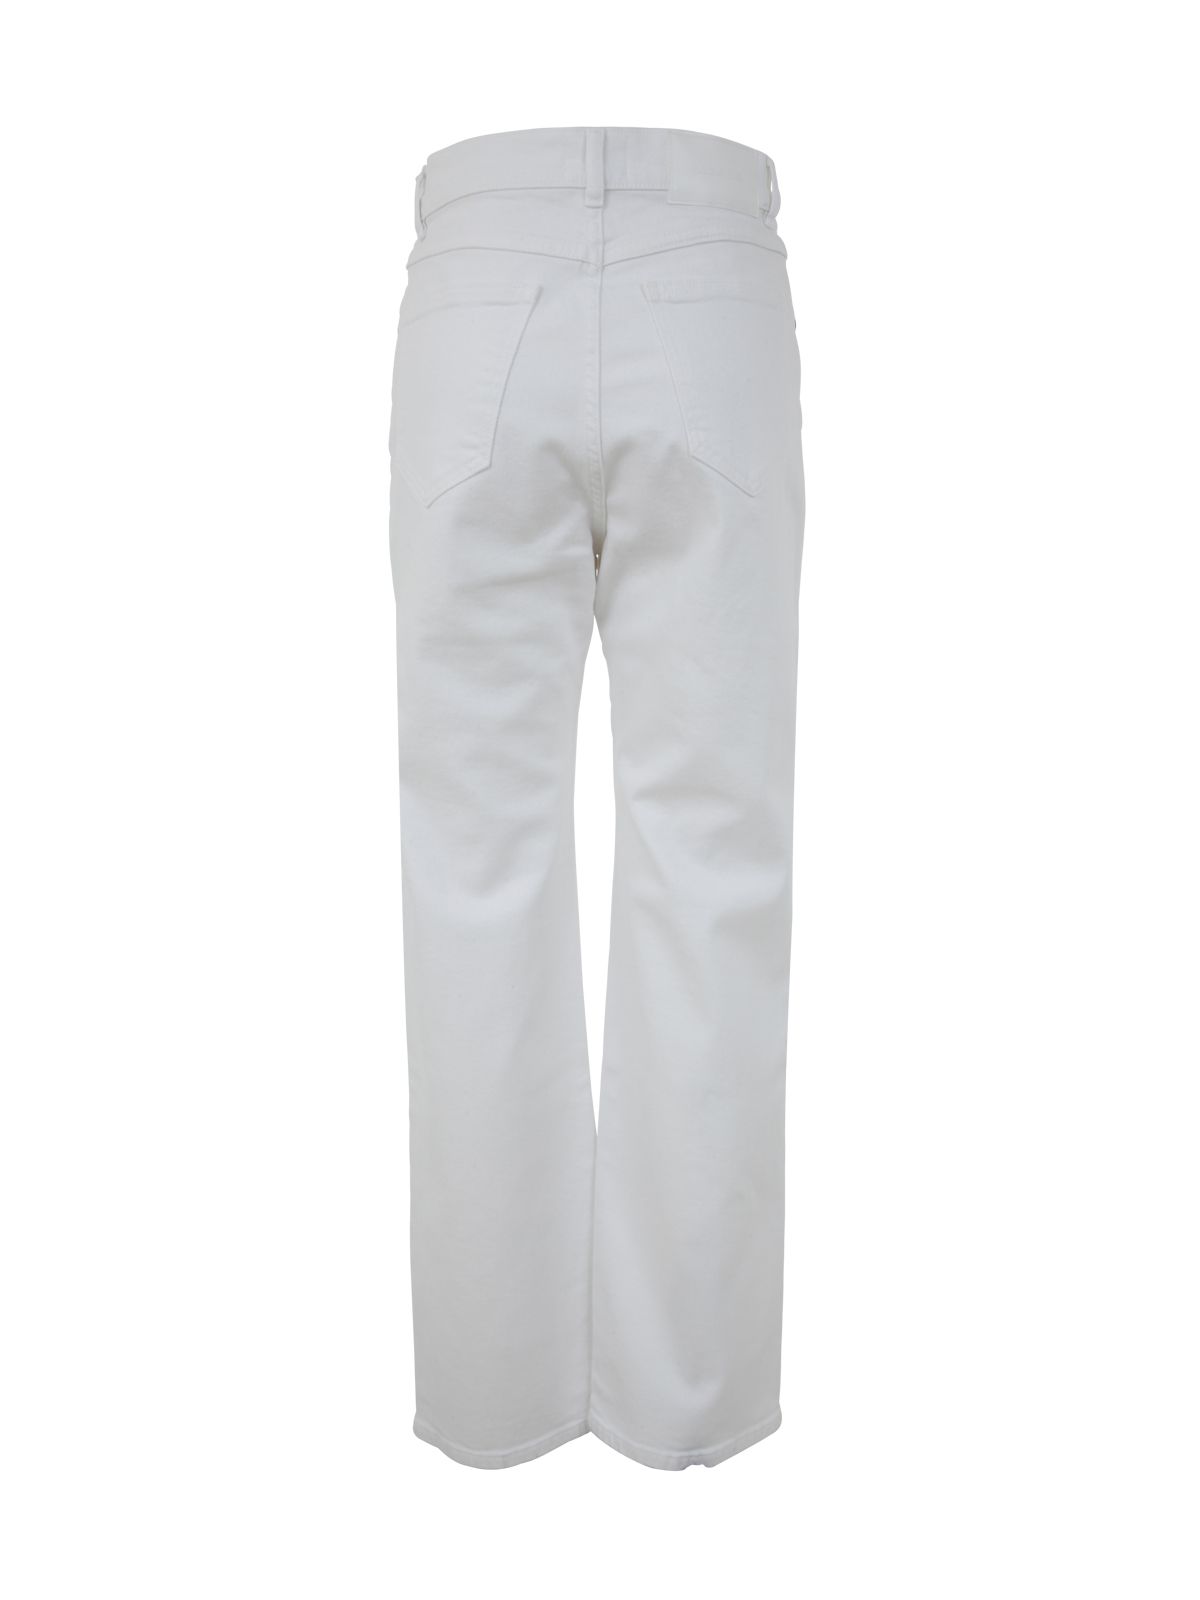 Shop P.a.r.o.s.h Cotton Drill Trousers